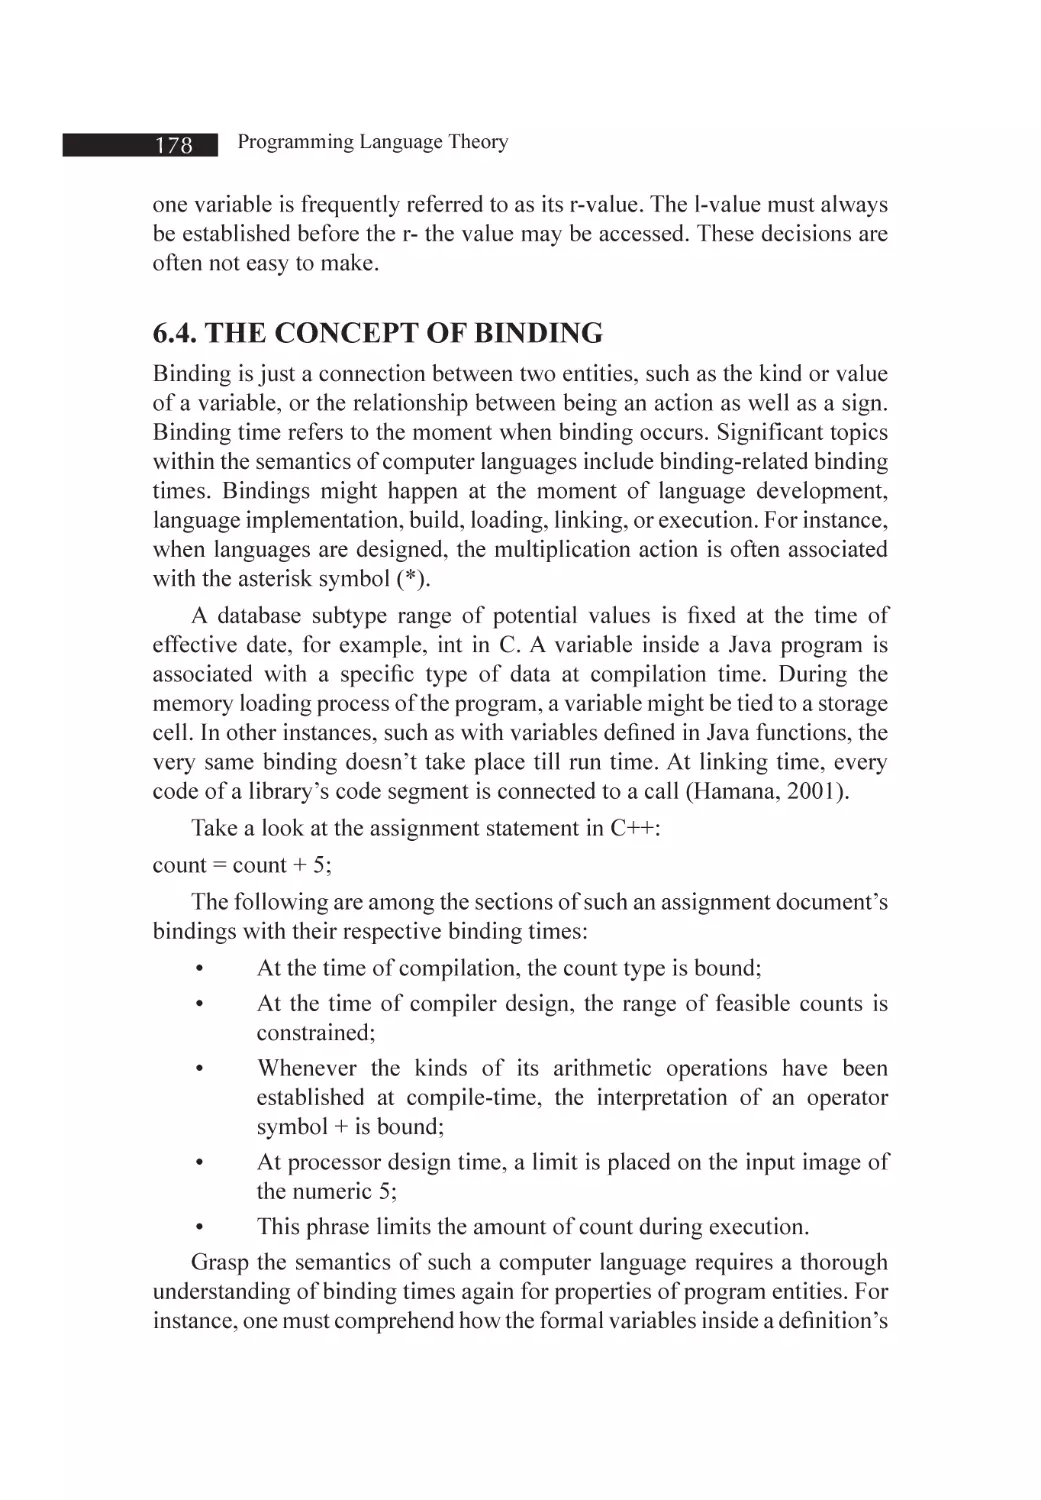 6.4. The Concept of Binding